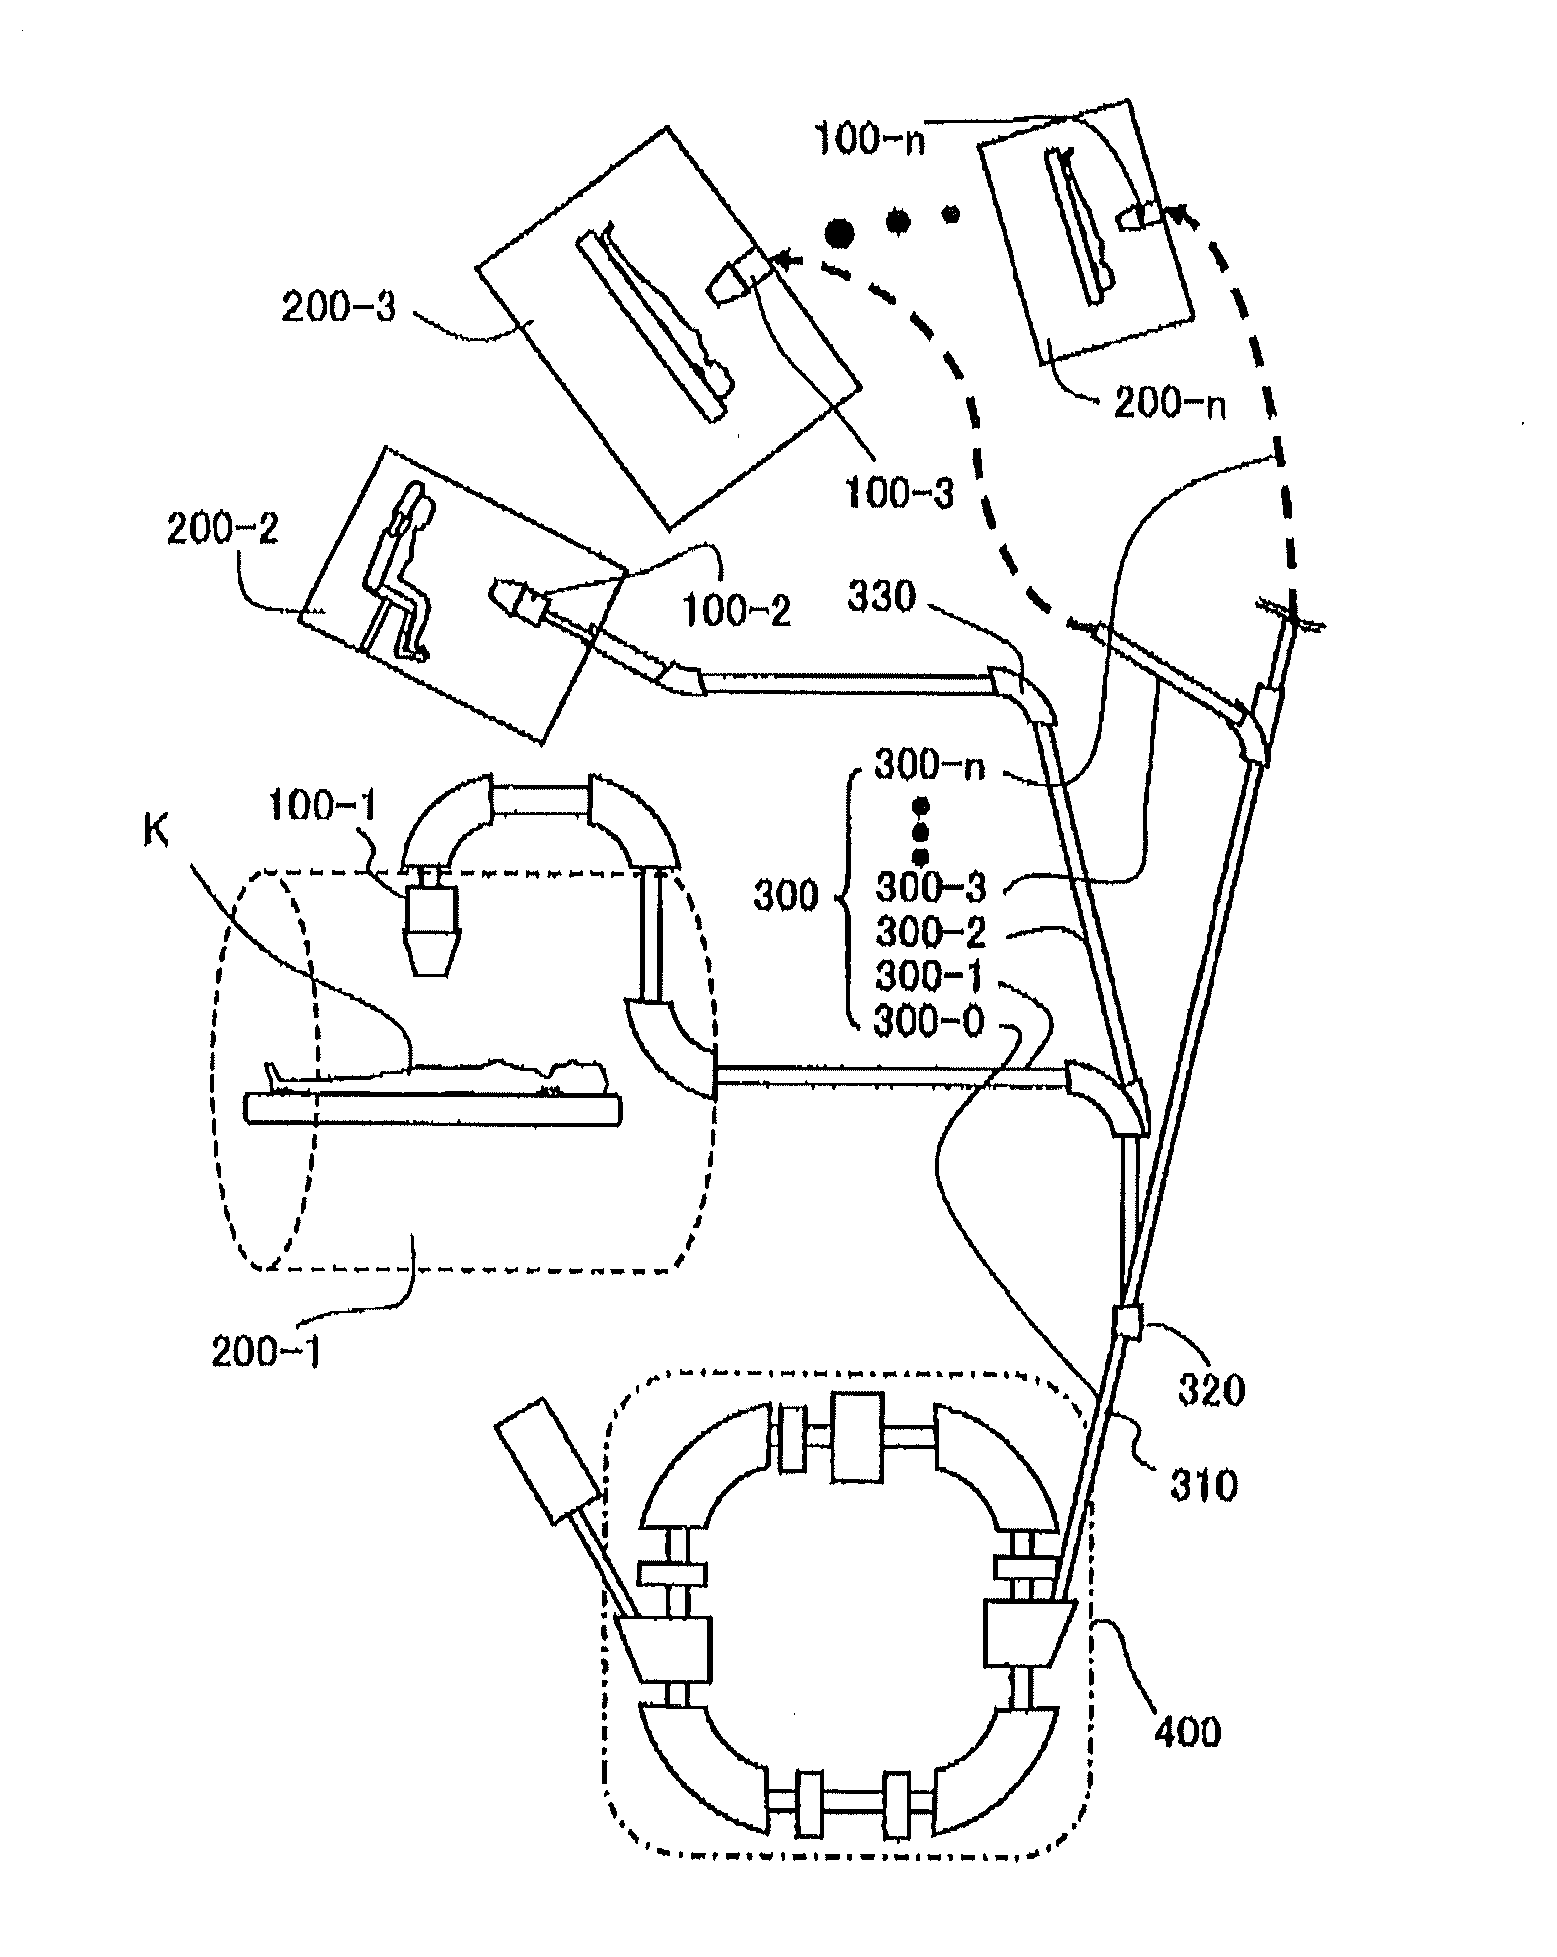 Range shifter and particle radiotherapy device